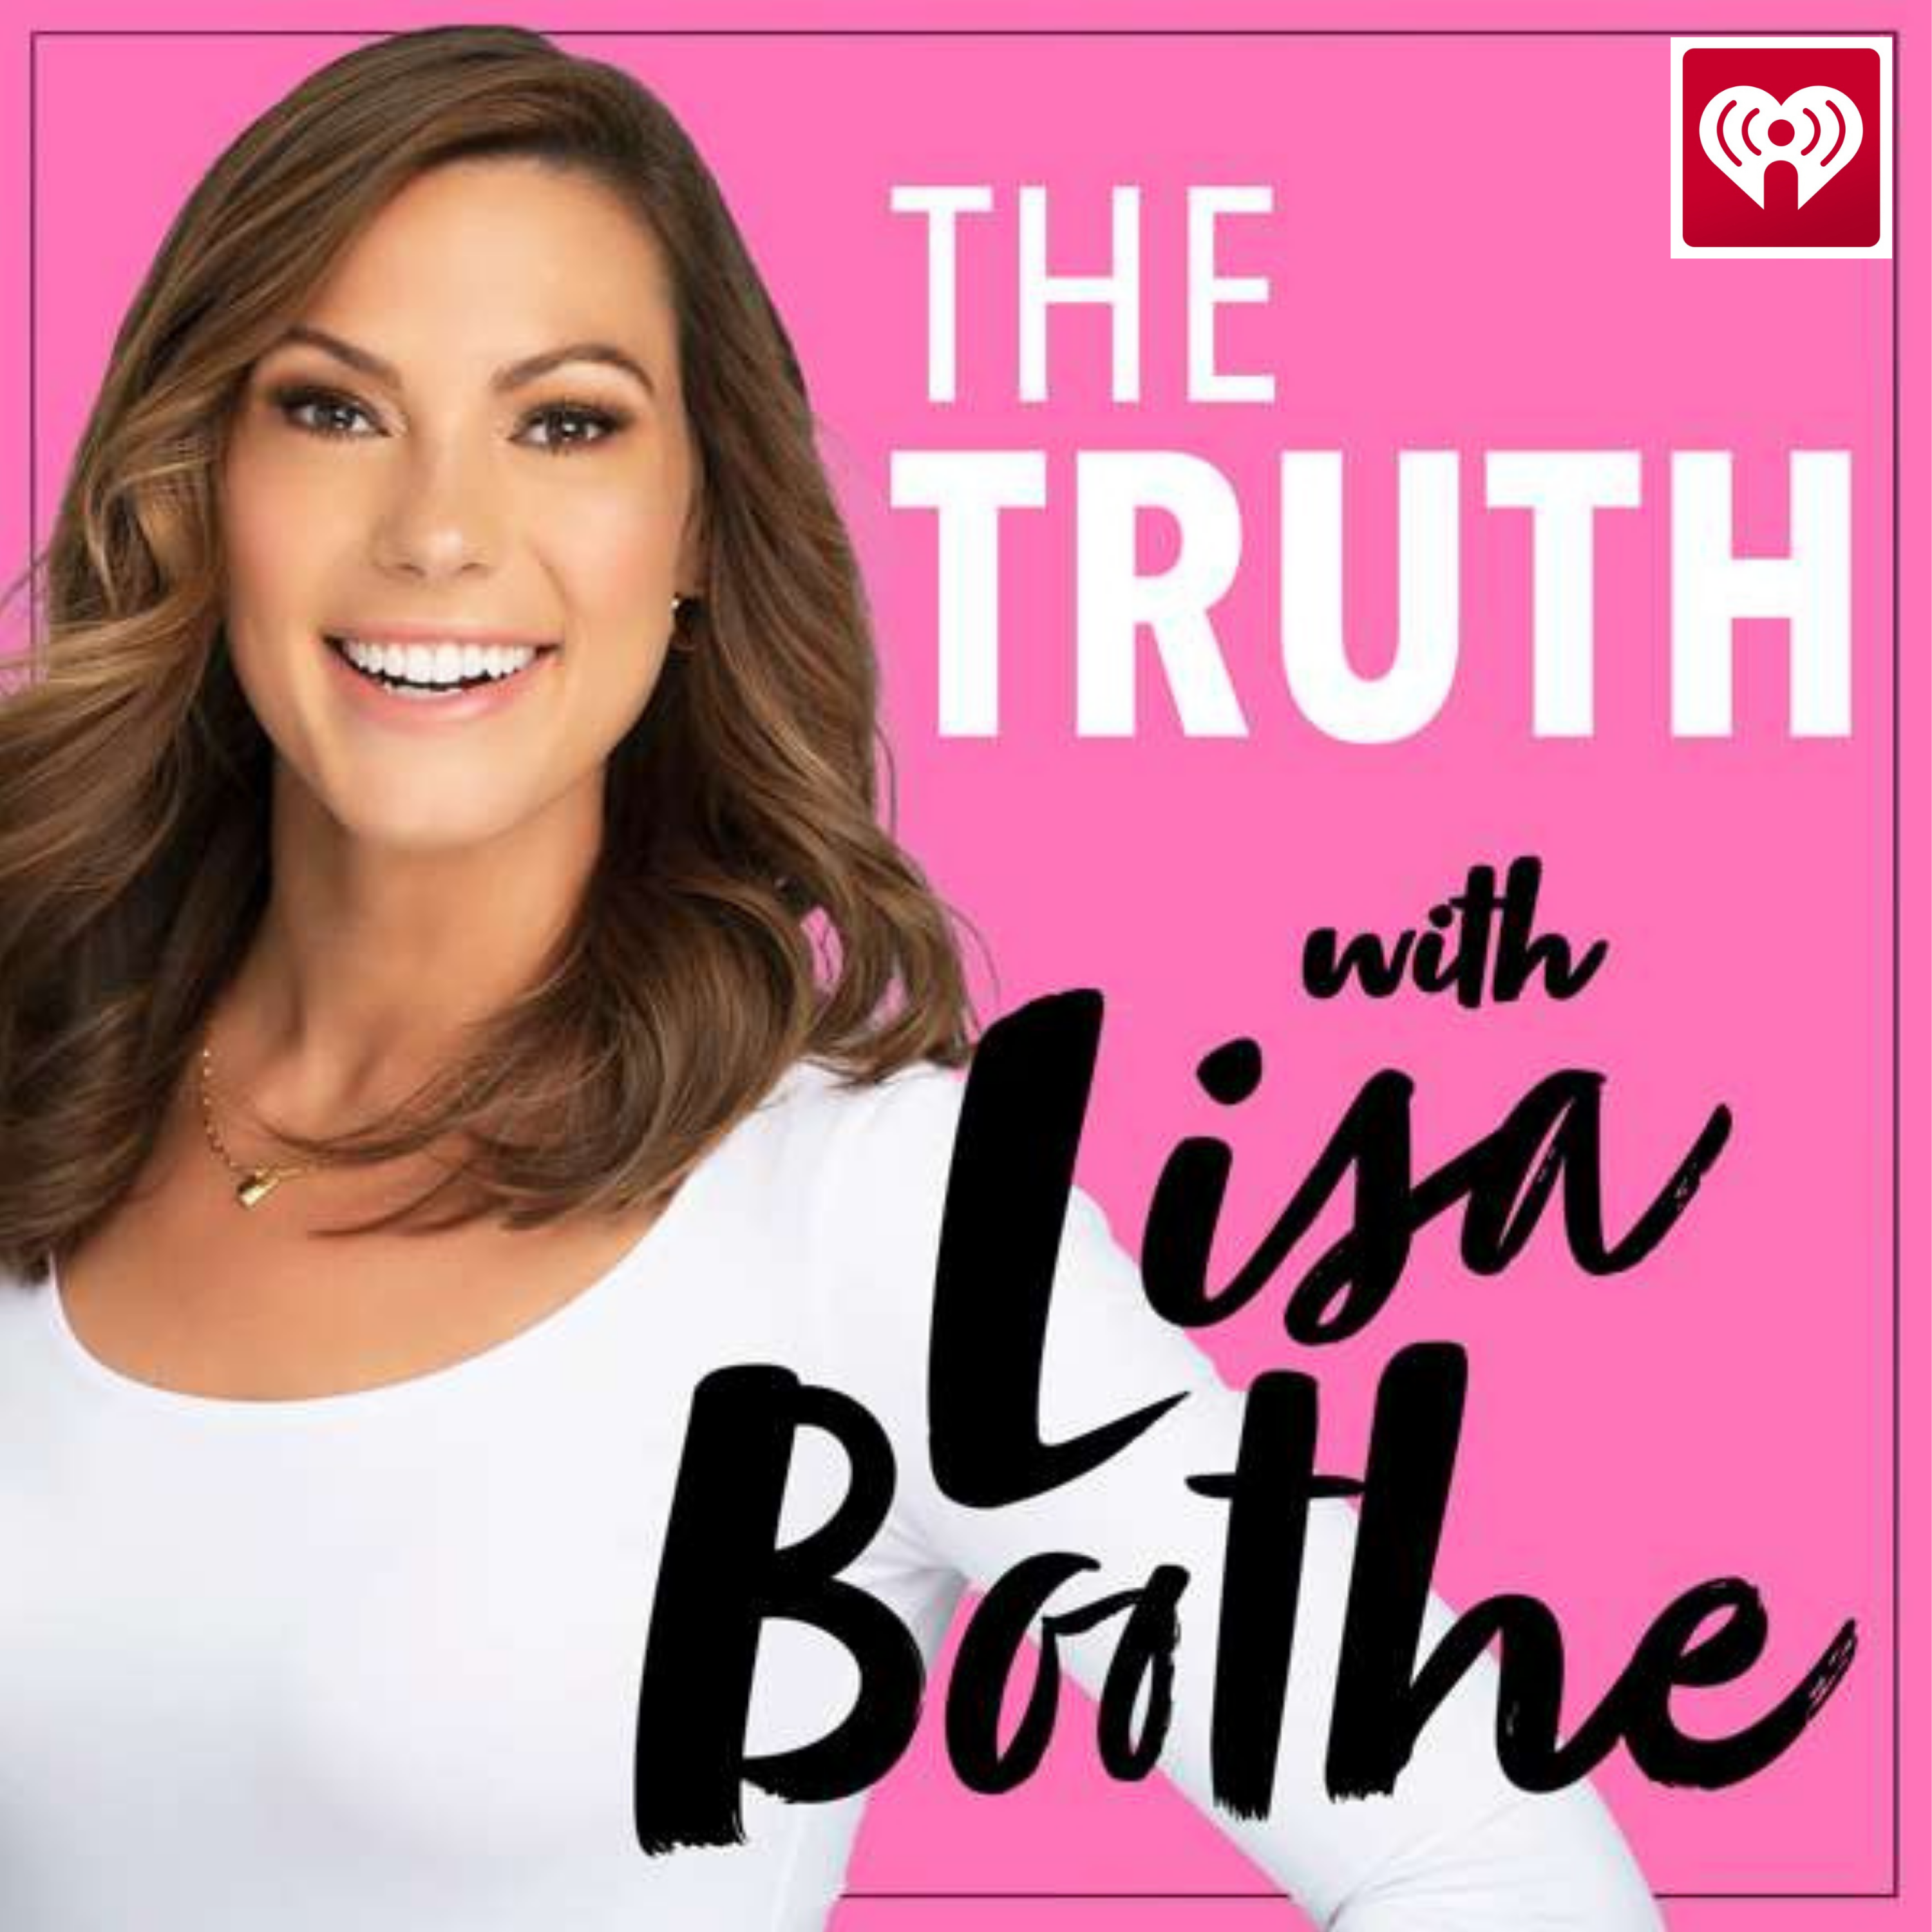 The Truth with Lisa Boothe: The Fight for Wisconsin with Eric Hovde